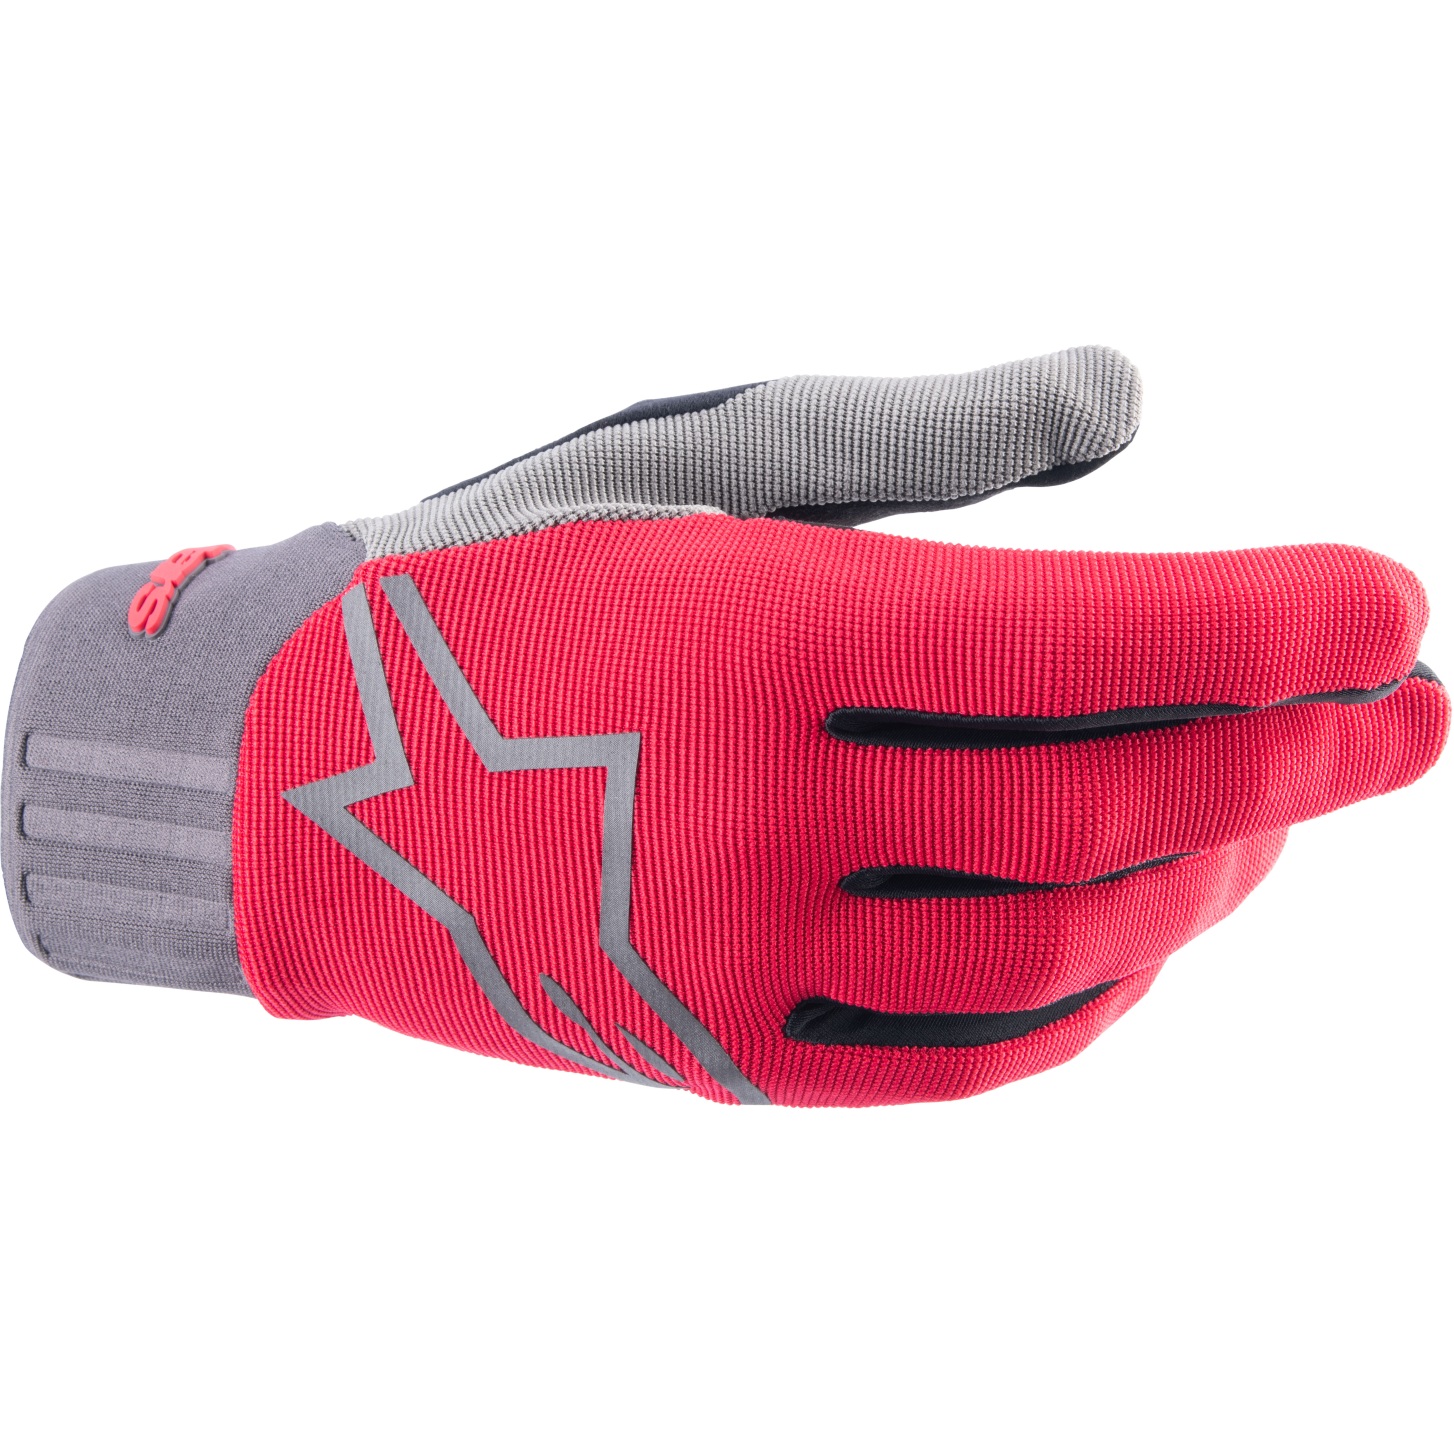 Picture of Alpinestars A-Dura Gloves - red fluo